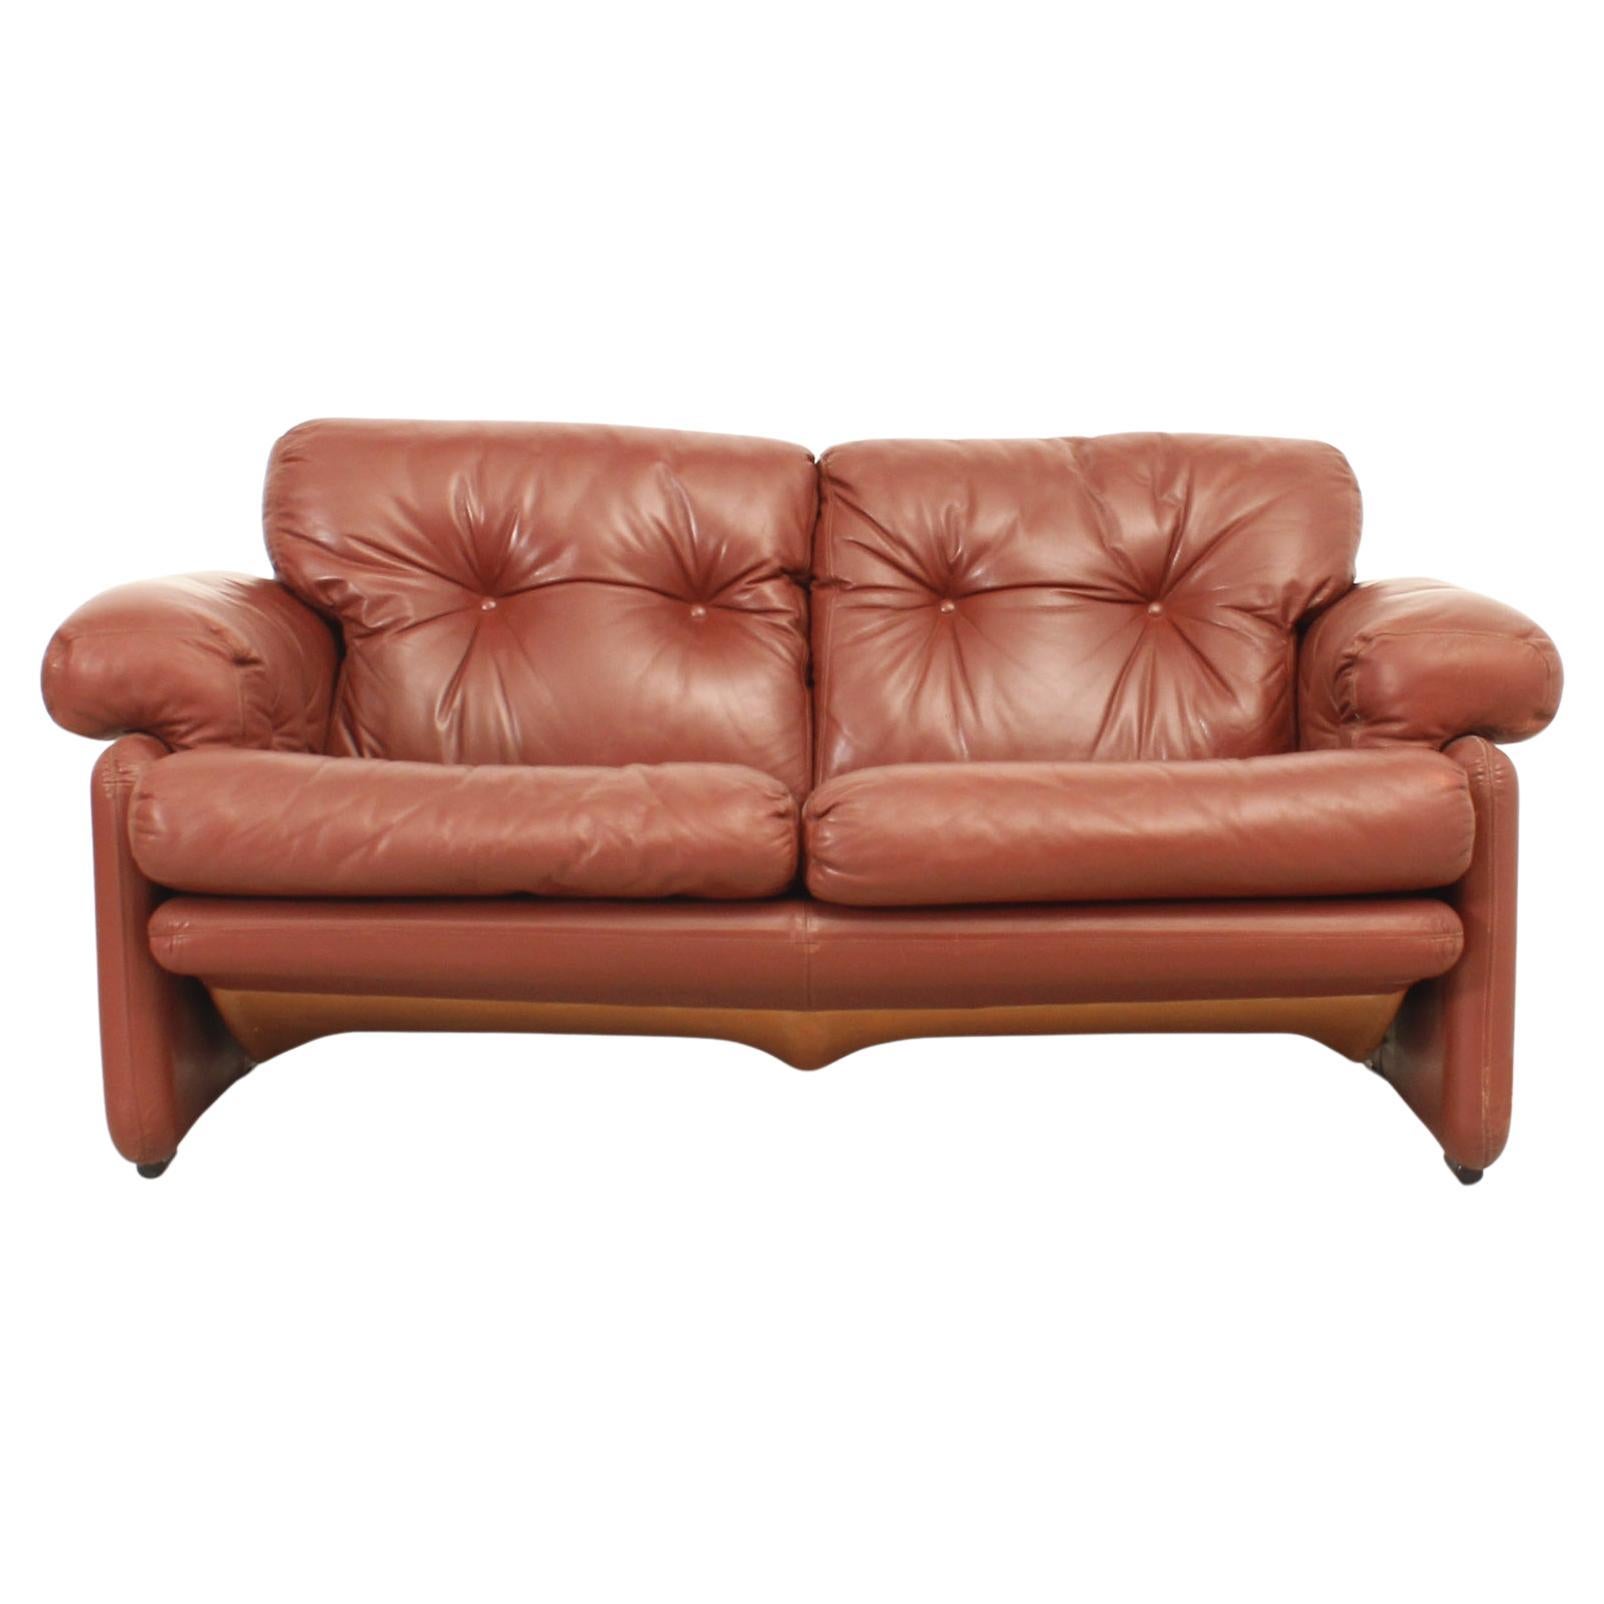 Coronado Two-seater Sofa by Tobia Scarpa in Cognac Leather, 1969 For Sale